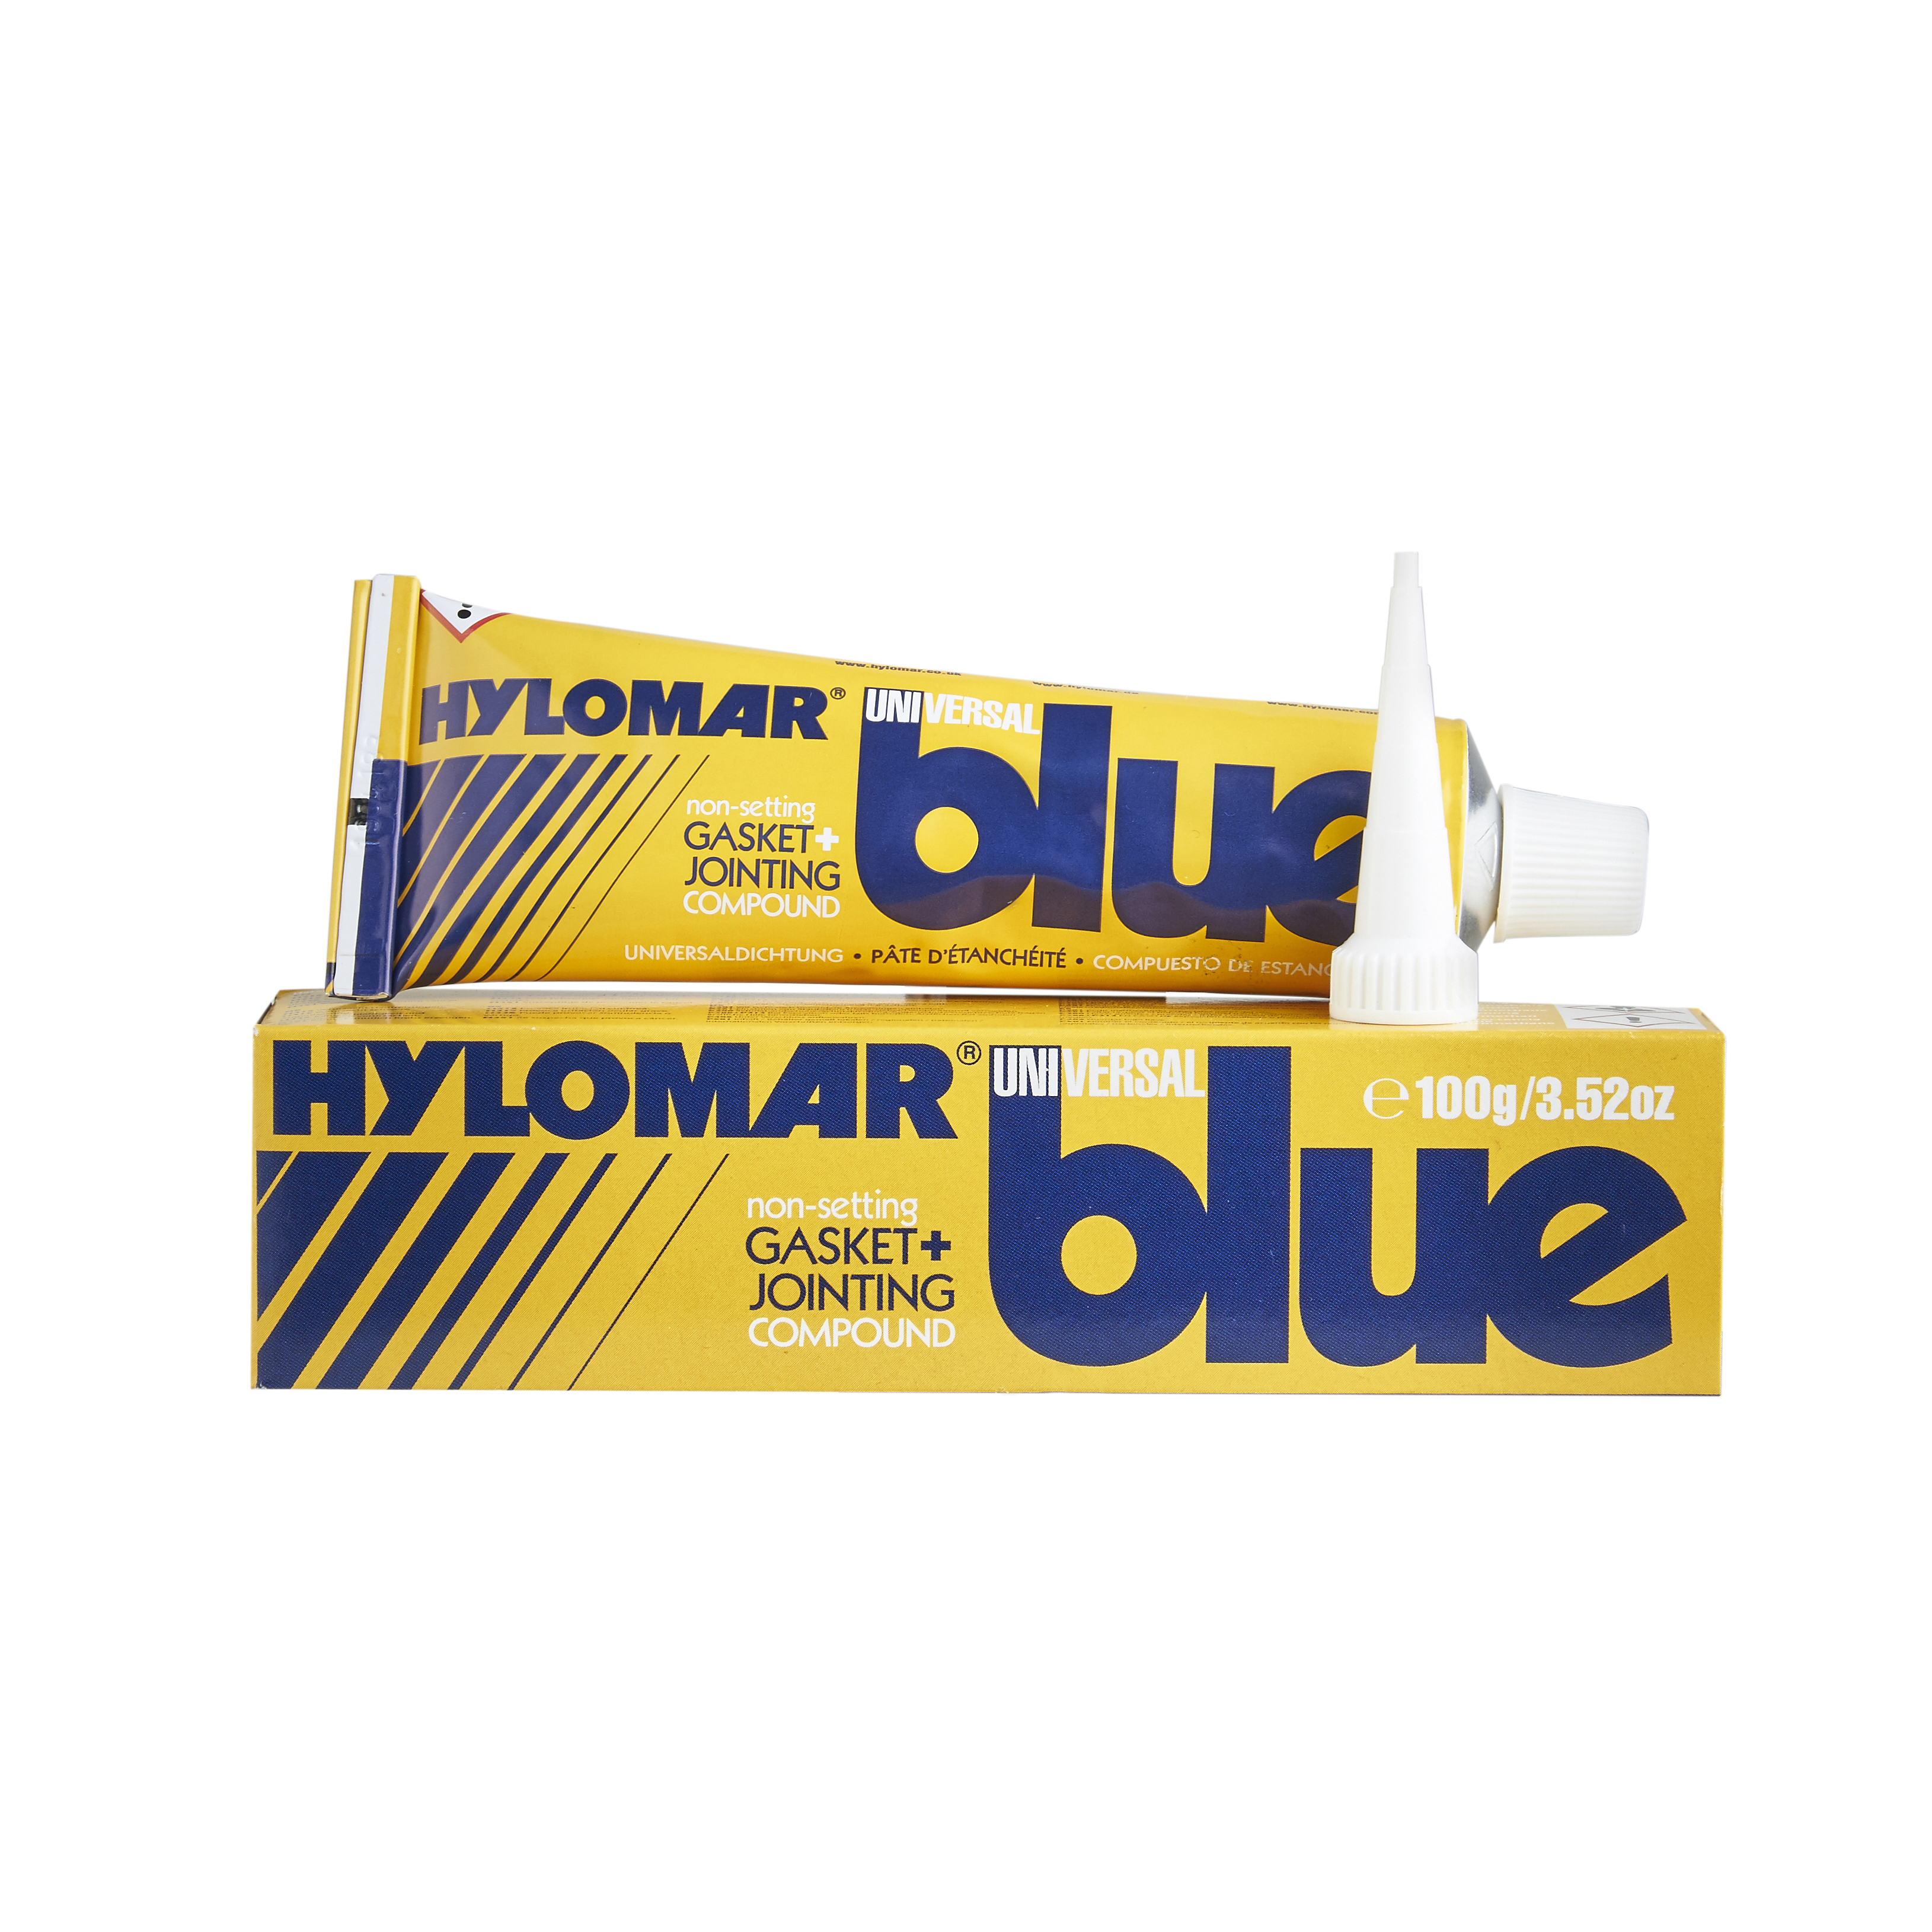 HYLOMAR Blue Gasket & Jointing Compound 100g (Box of 12)